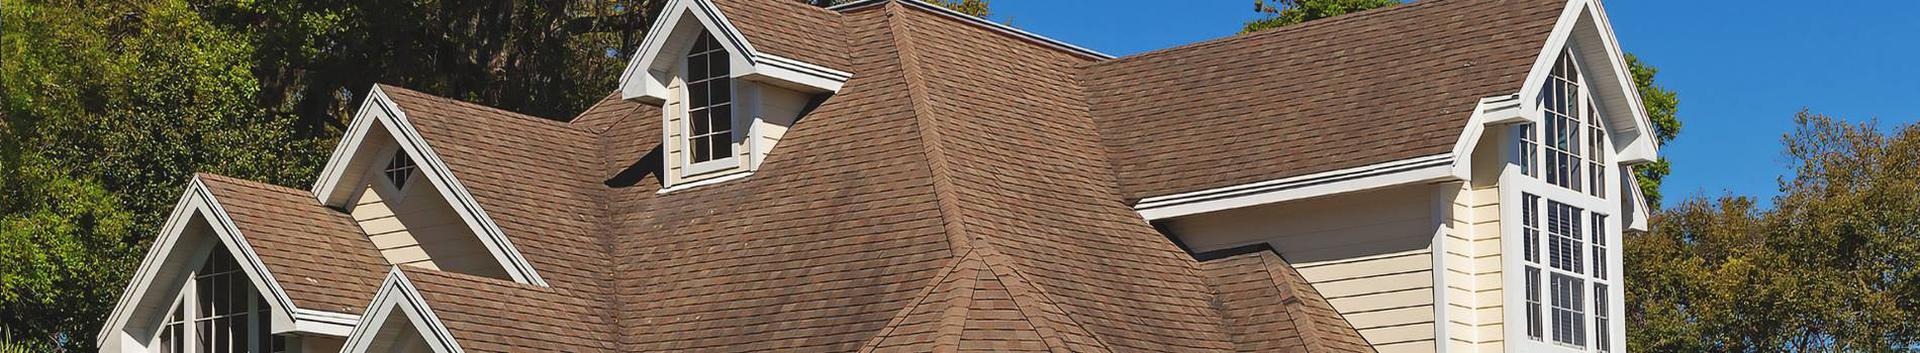 roof, thermal insulation work, Roofs, Reed rooftops, maintenance, repair work, material, chimney, Construction, roof